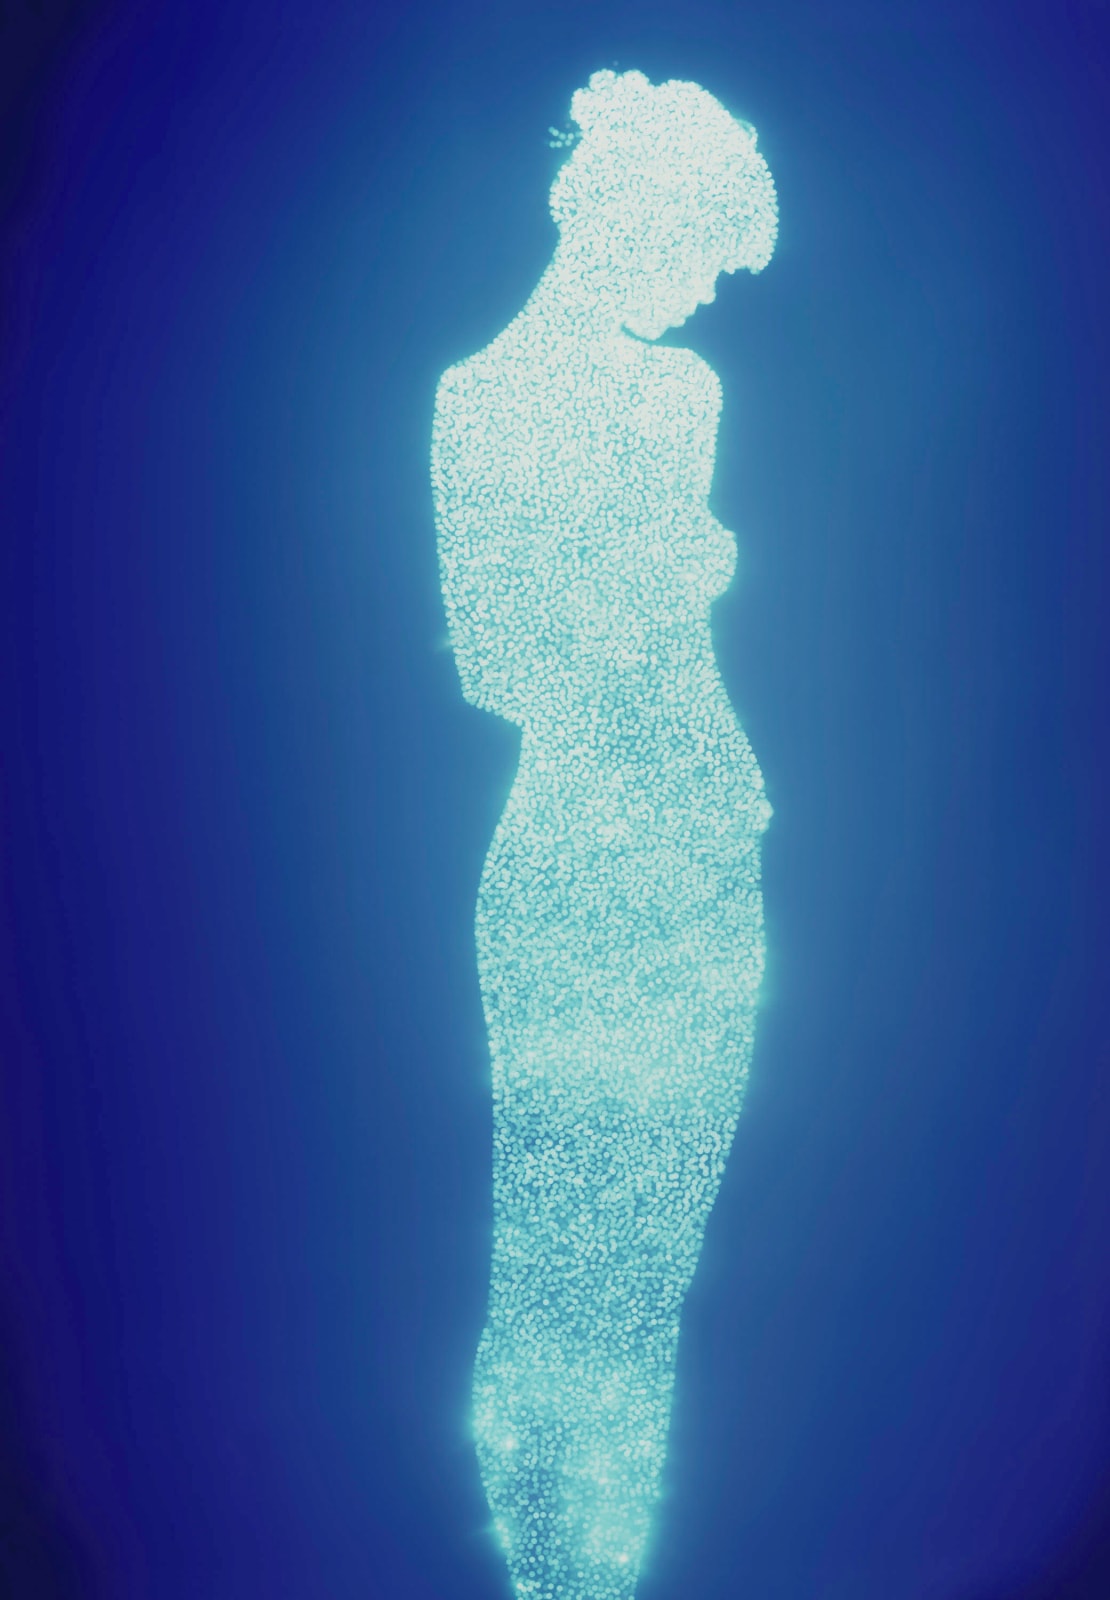 Christopher Bucklow Tetrarch, 11.29am, 17th September silhouette of nude woman in light made of pinholes illuminated by sunlight coming through blue background